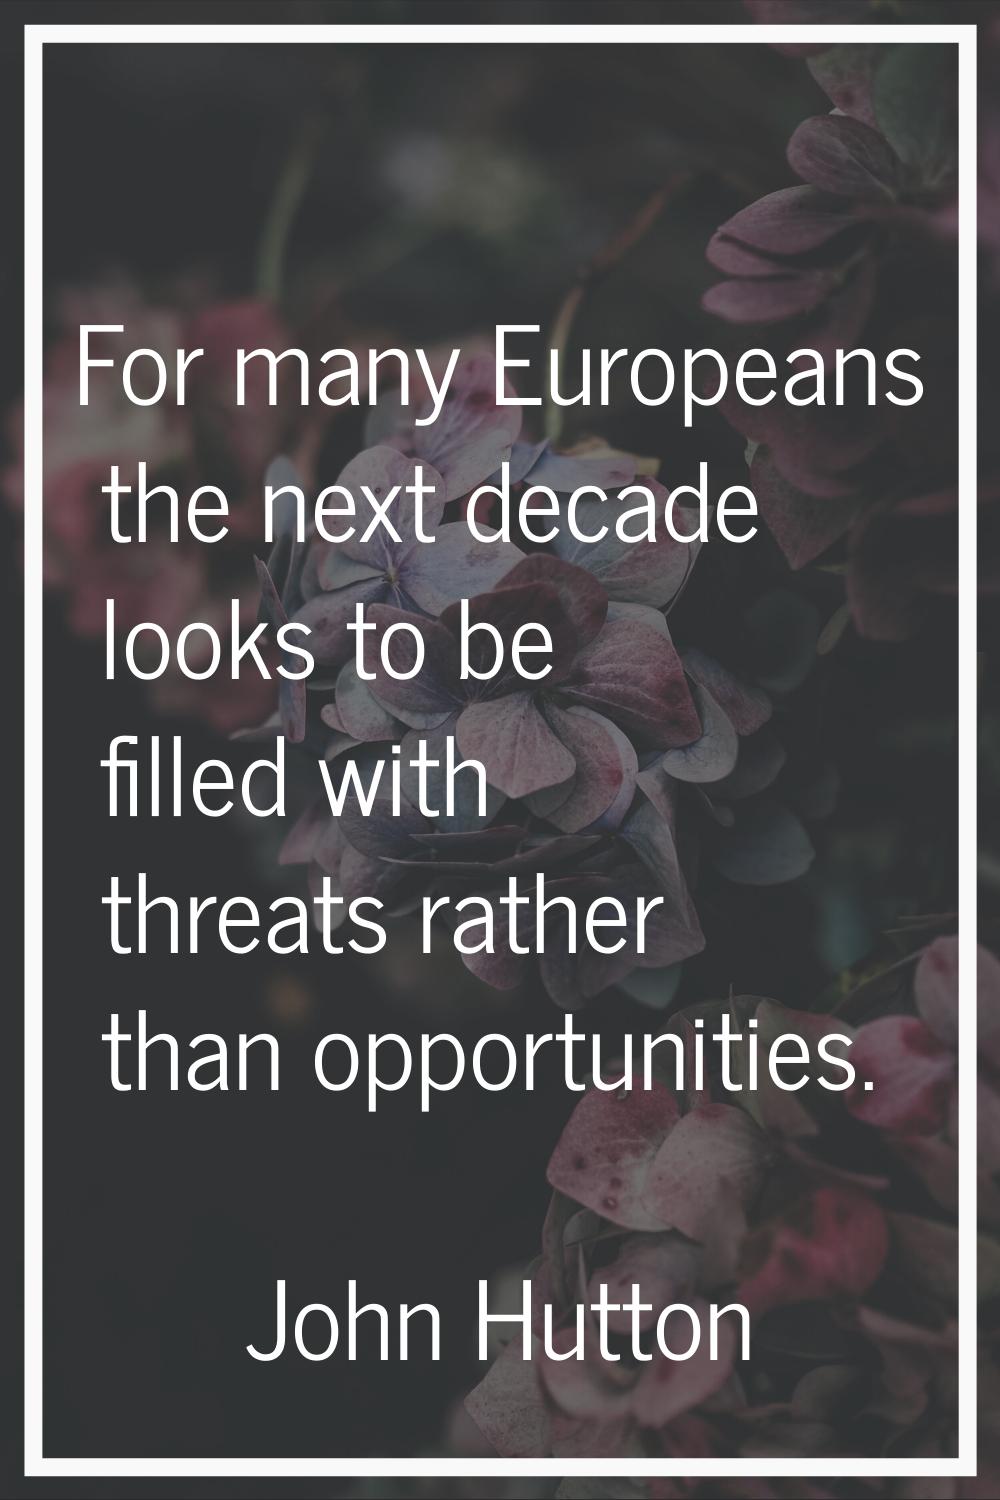 For many Europeans the next decade looks to be filled with threats rather than opportunities.